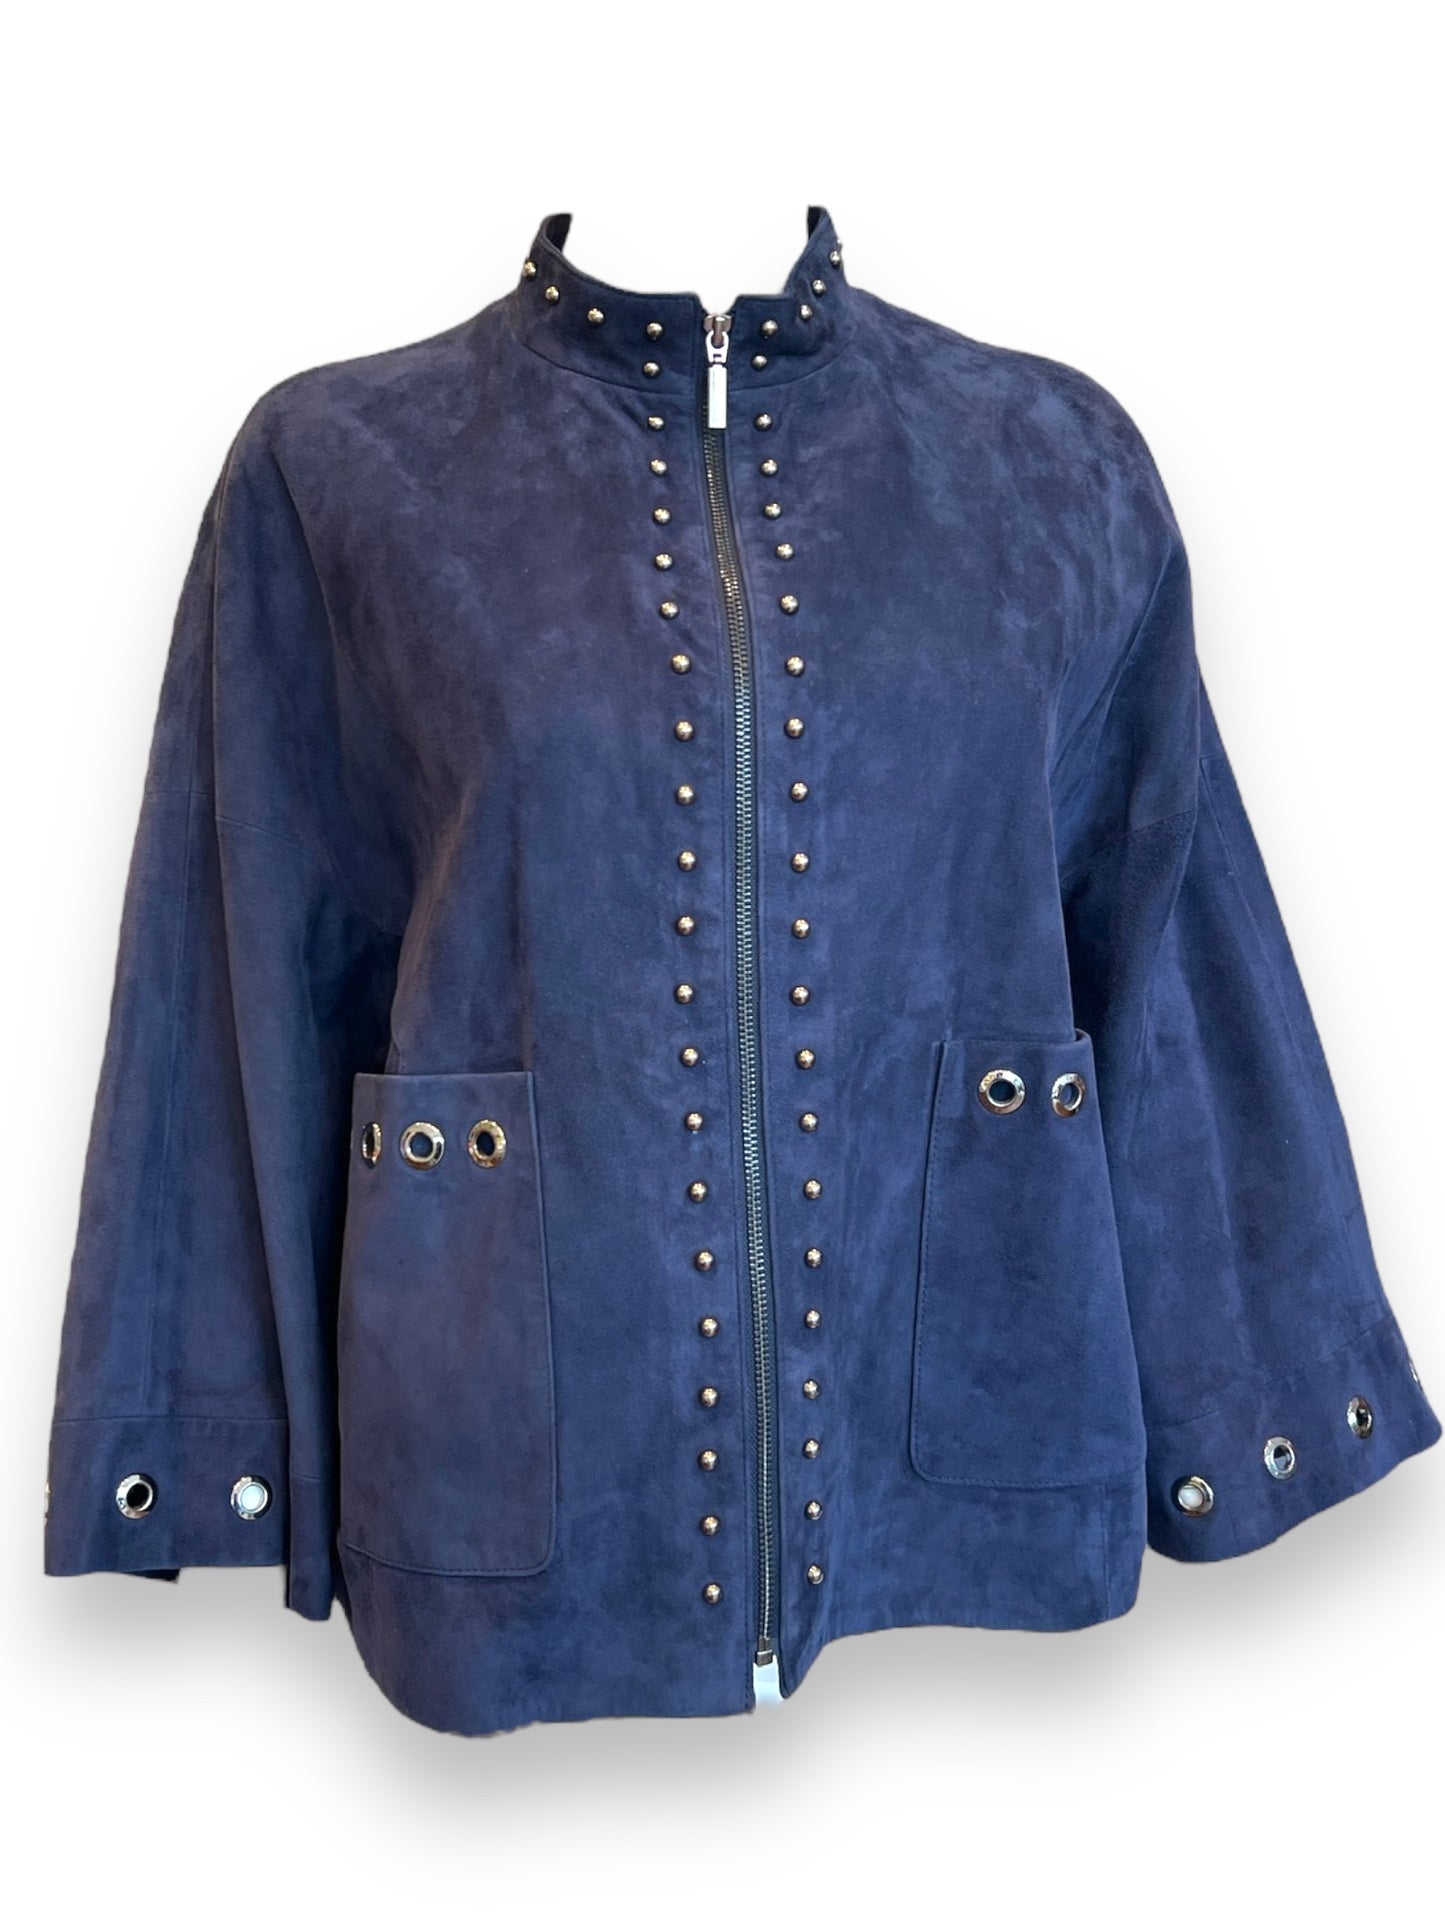 Short Navy Blue Suede Jacket with Pockets